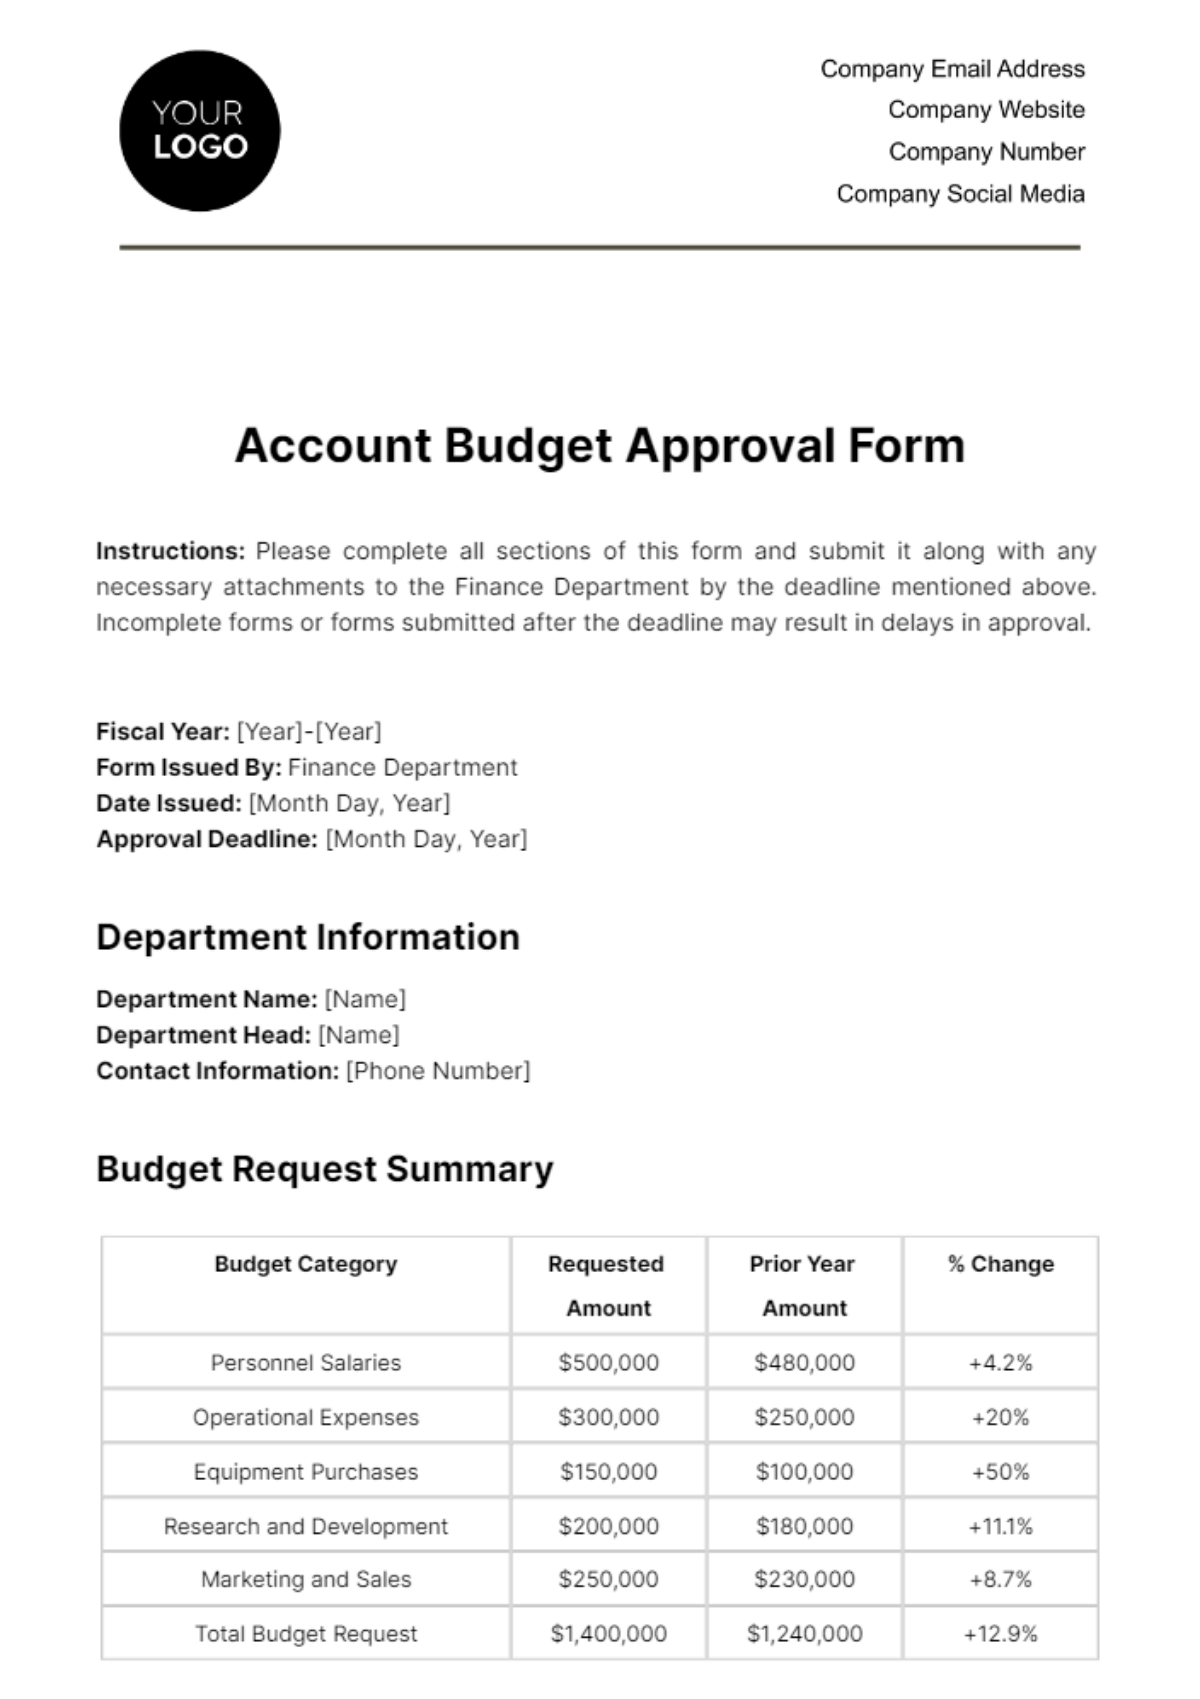 Free Account Budget Approval Form Template